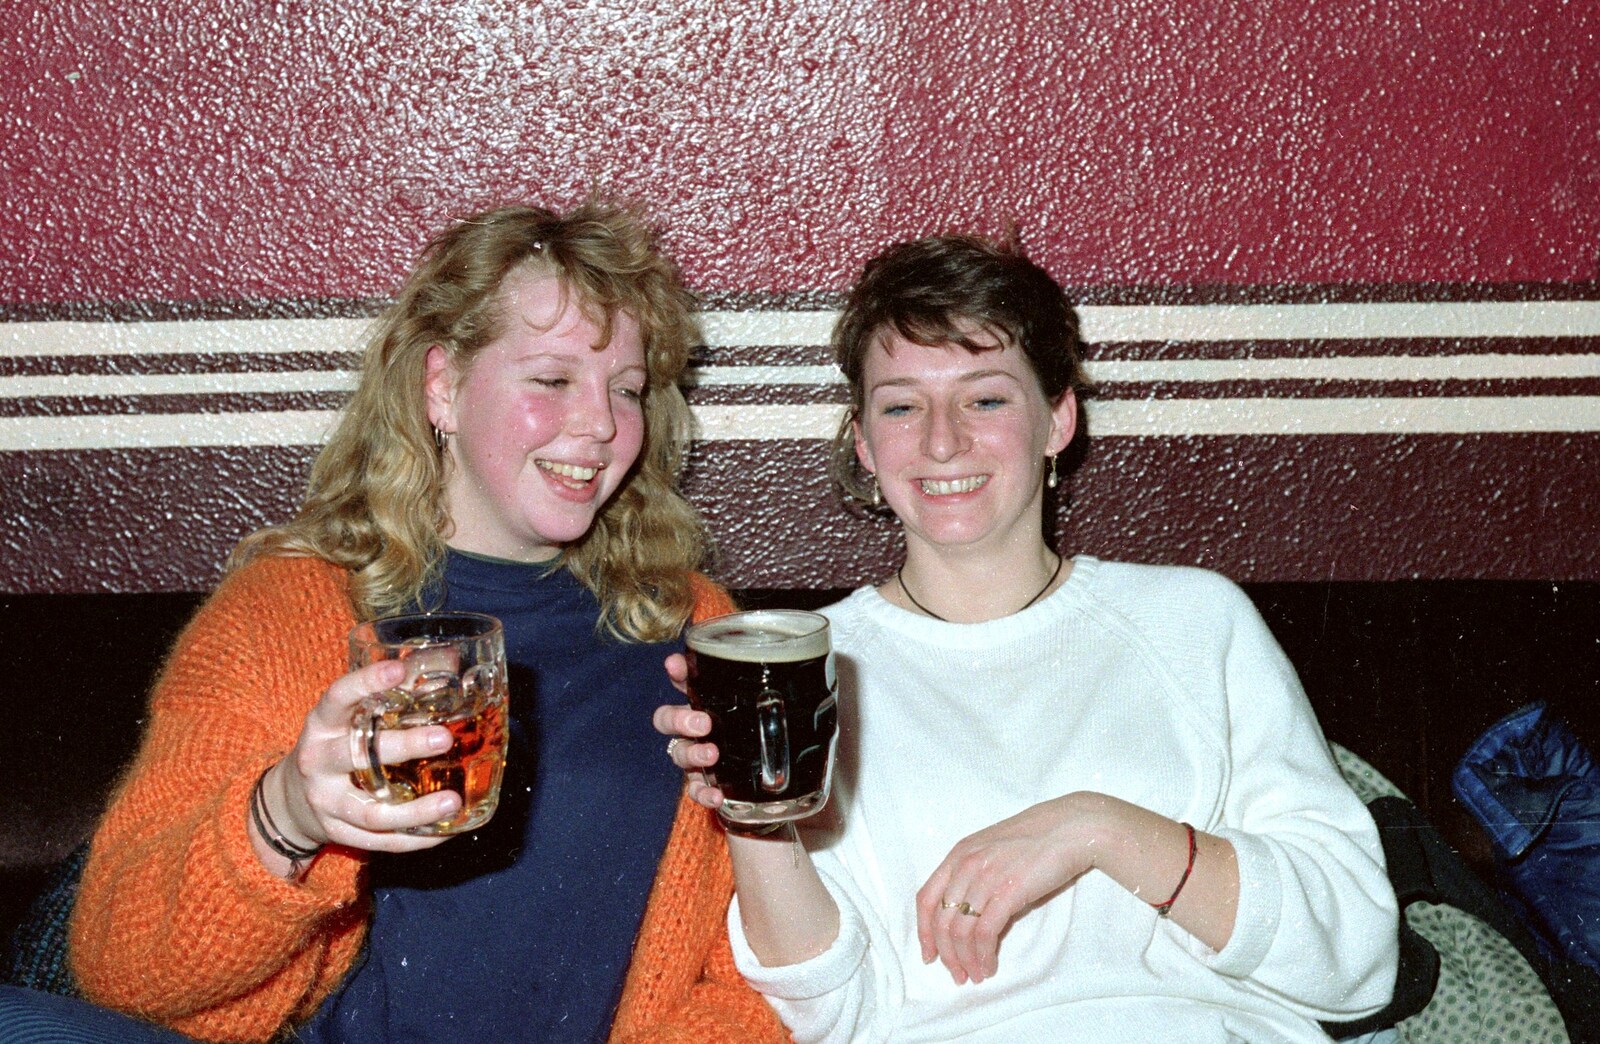 Girls drinking pints from Uni: A Party in Snobs Nightclub, Mayflower Street, Plymouth - 18th October 1986